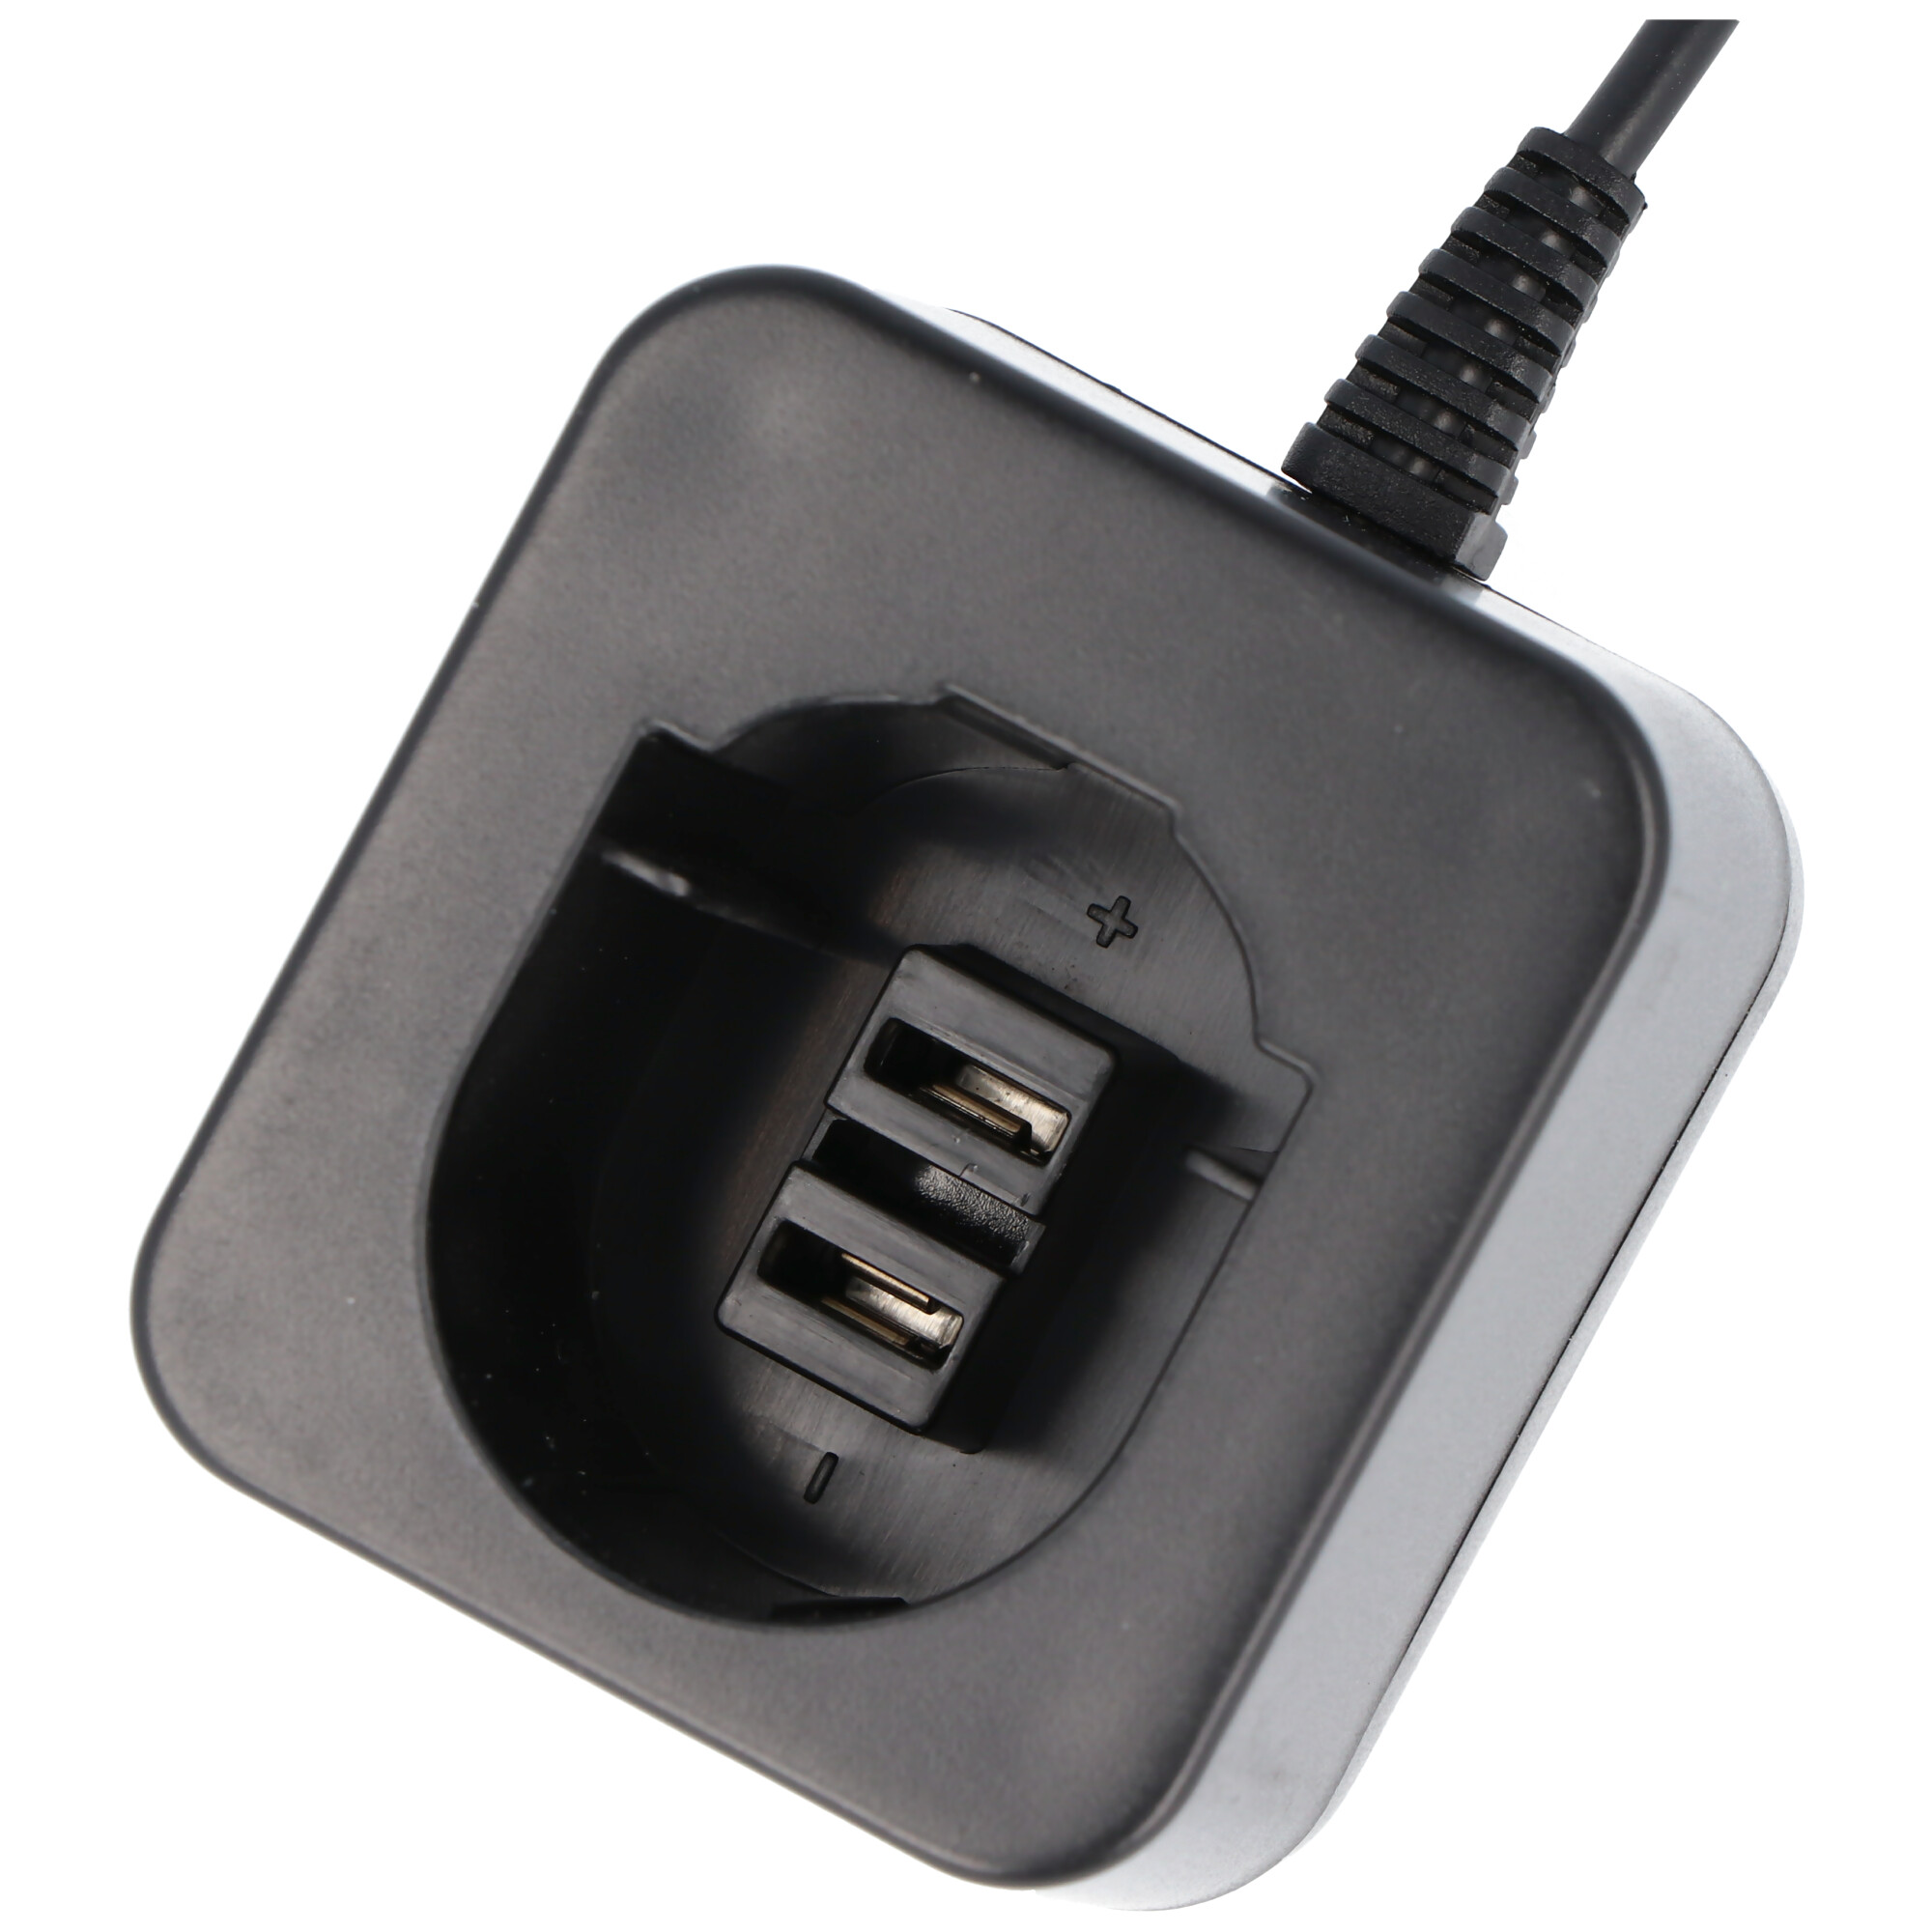 CHARGER for Black & Decker A9252 England SL1 3YD 